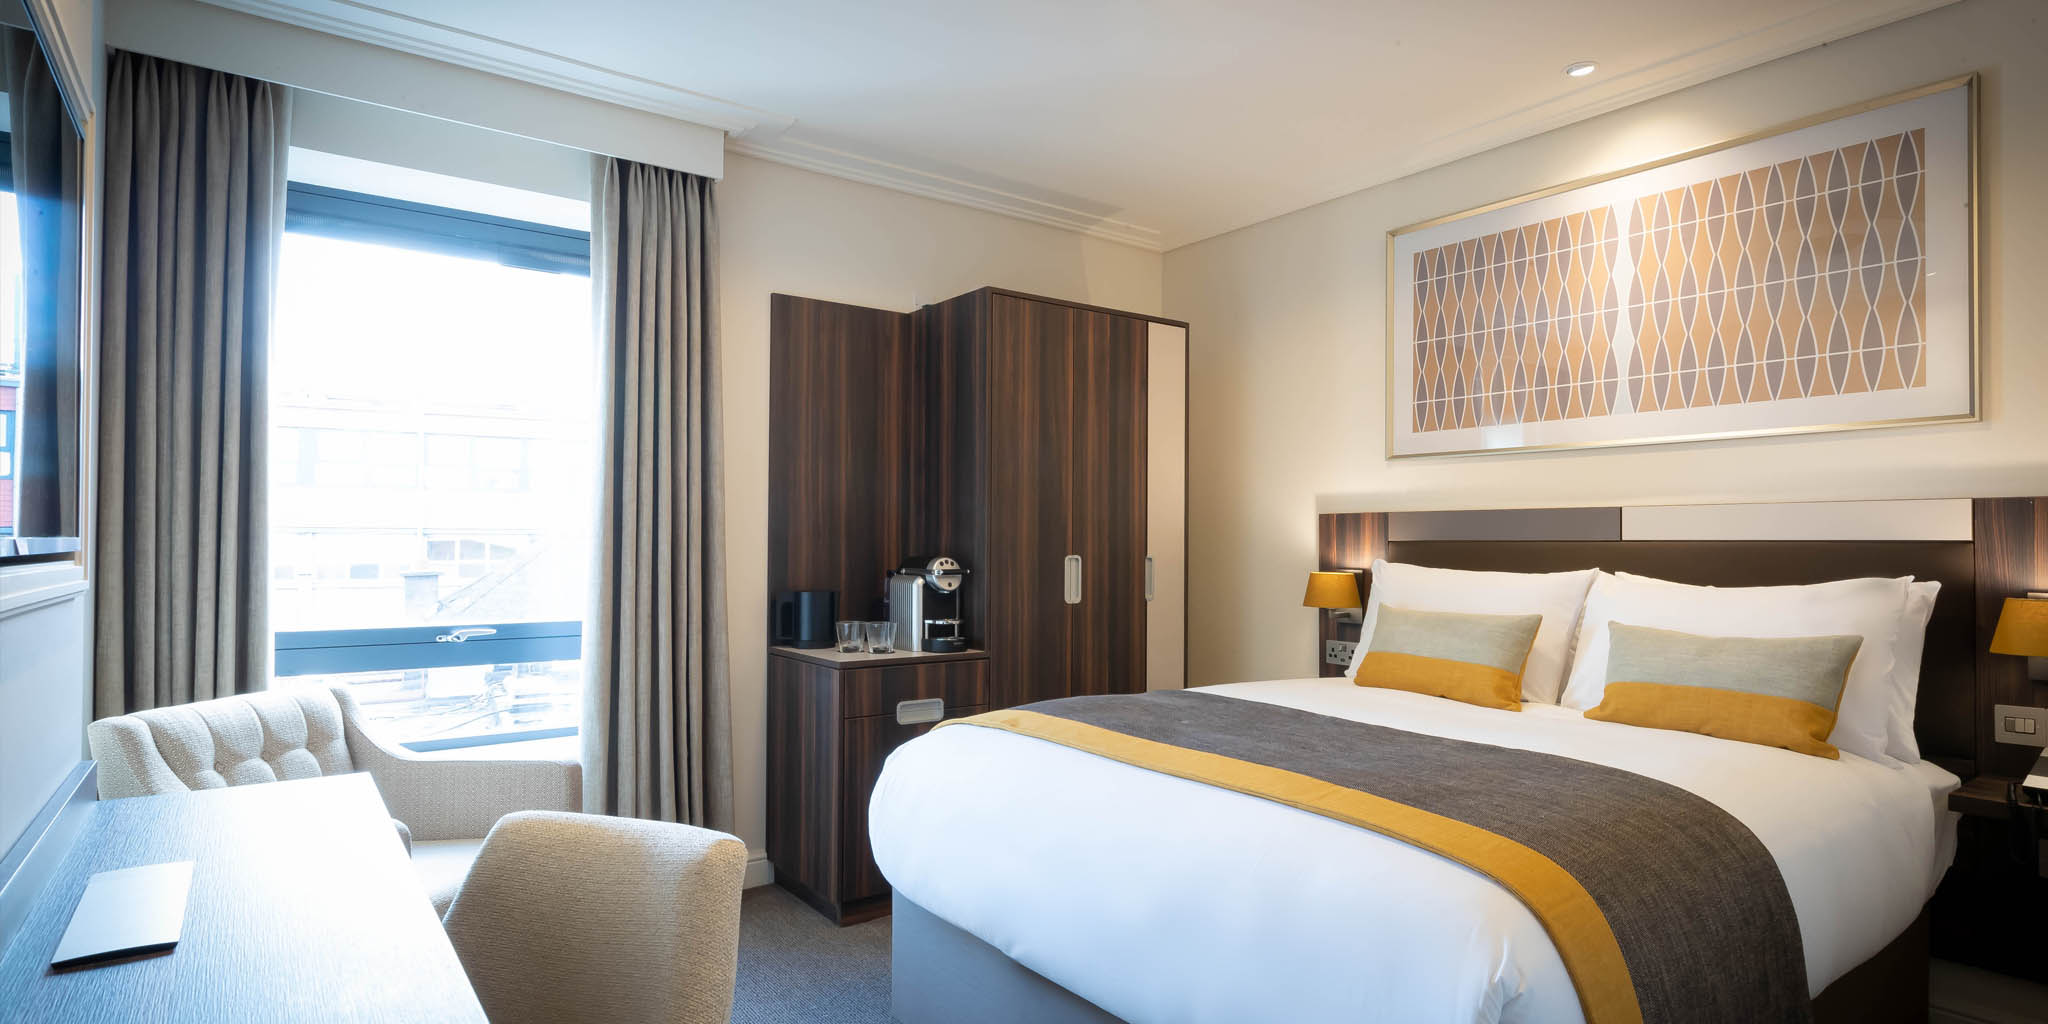 What is a double room in a hotel?